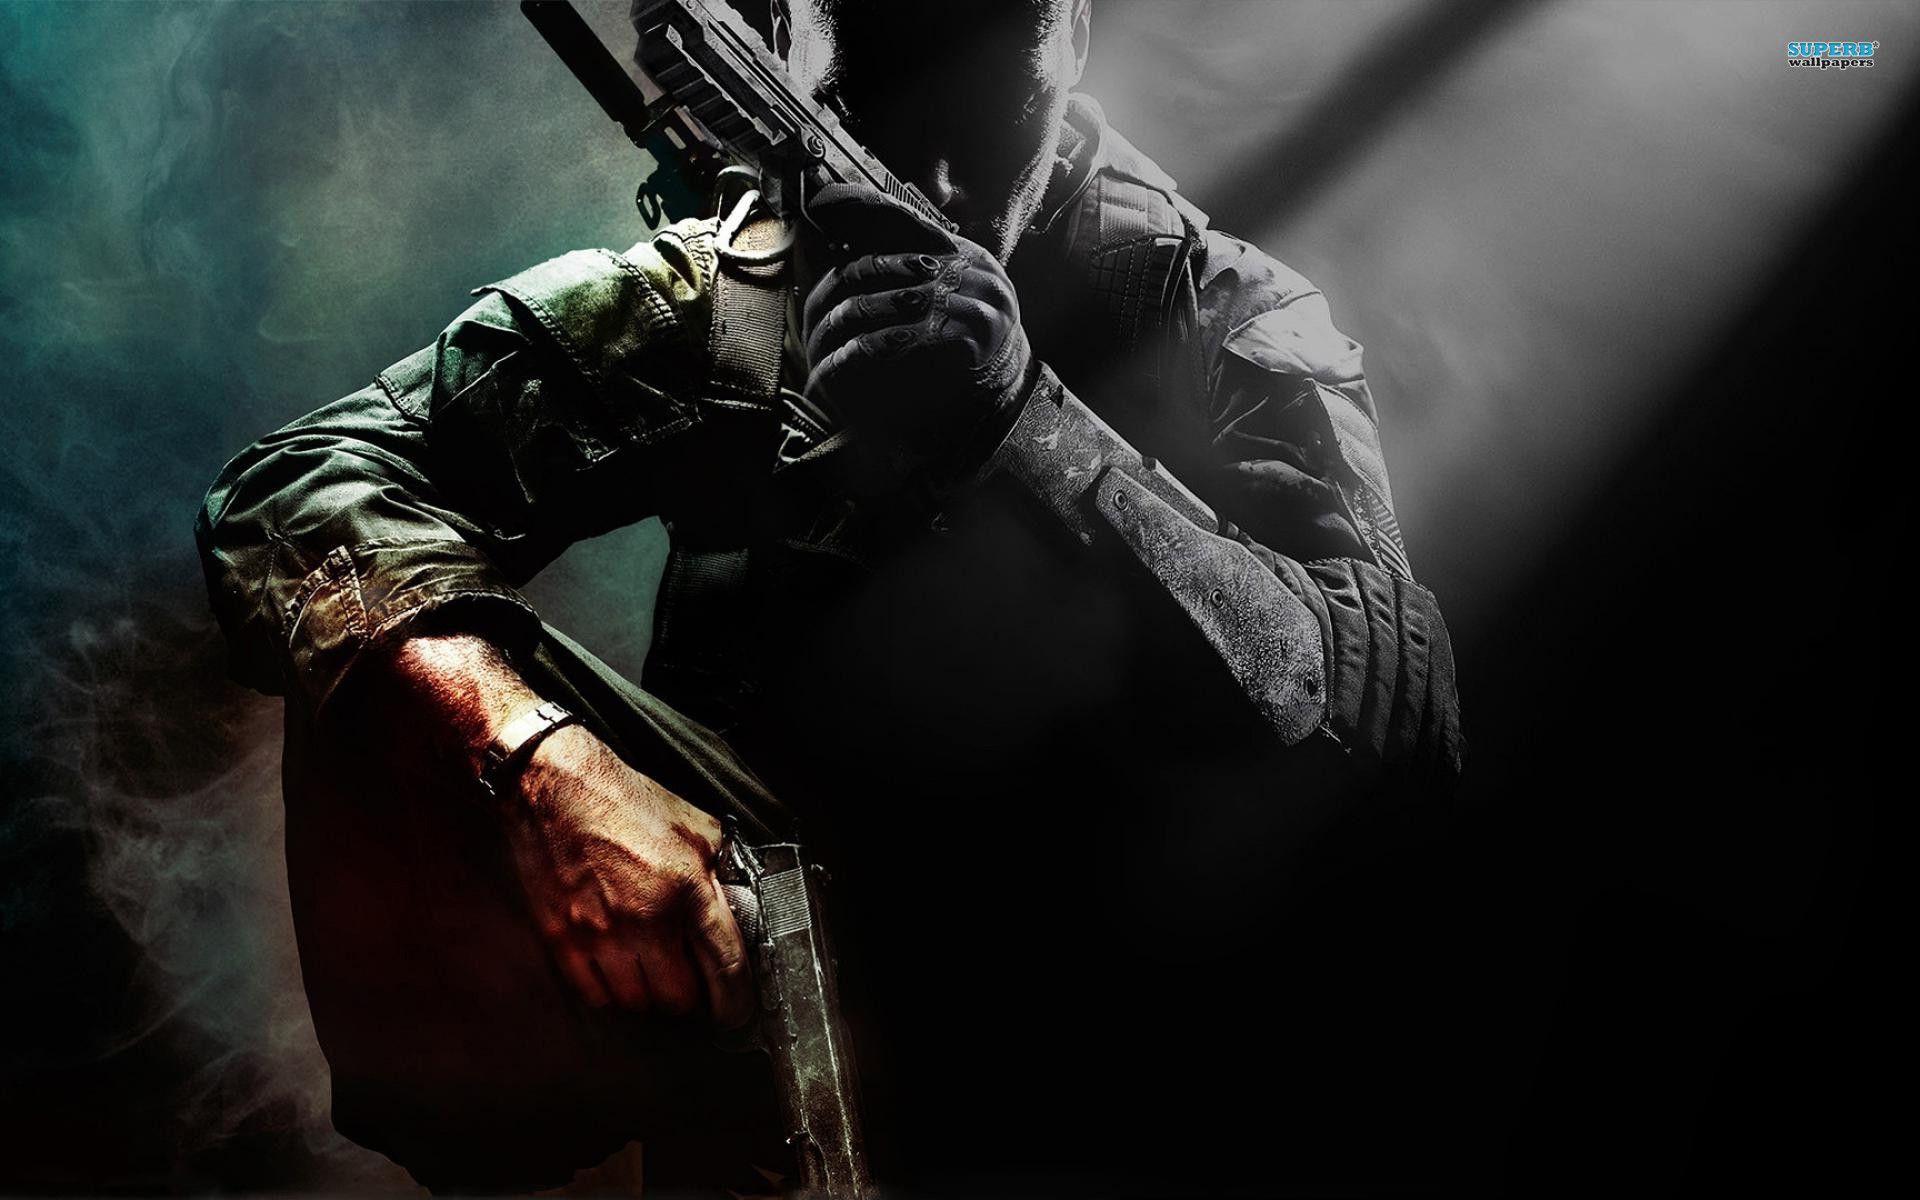 Call Of Duty Black Ops Backgrounds